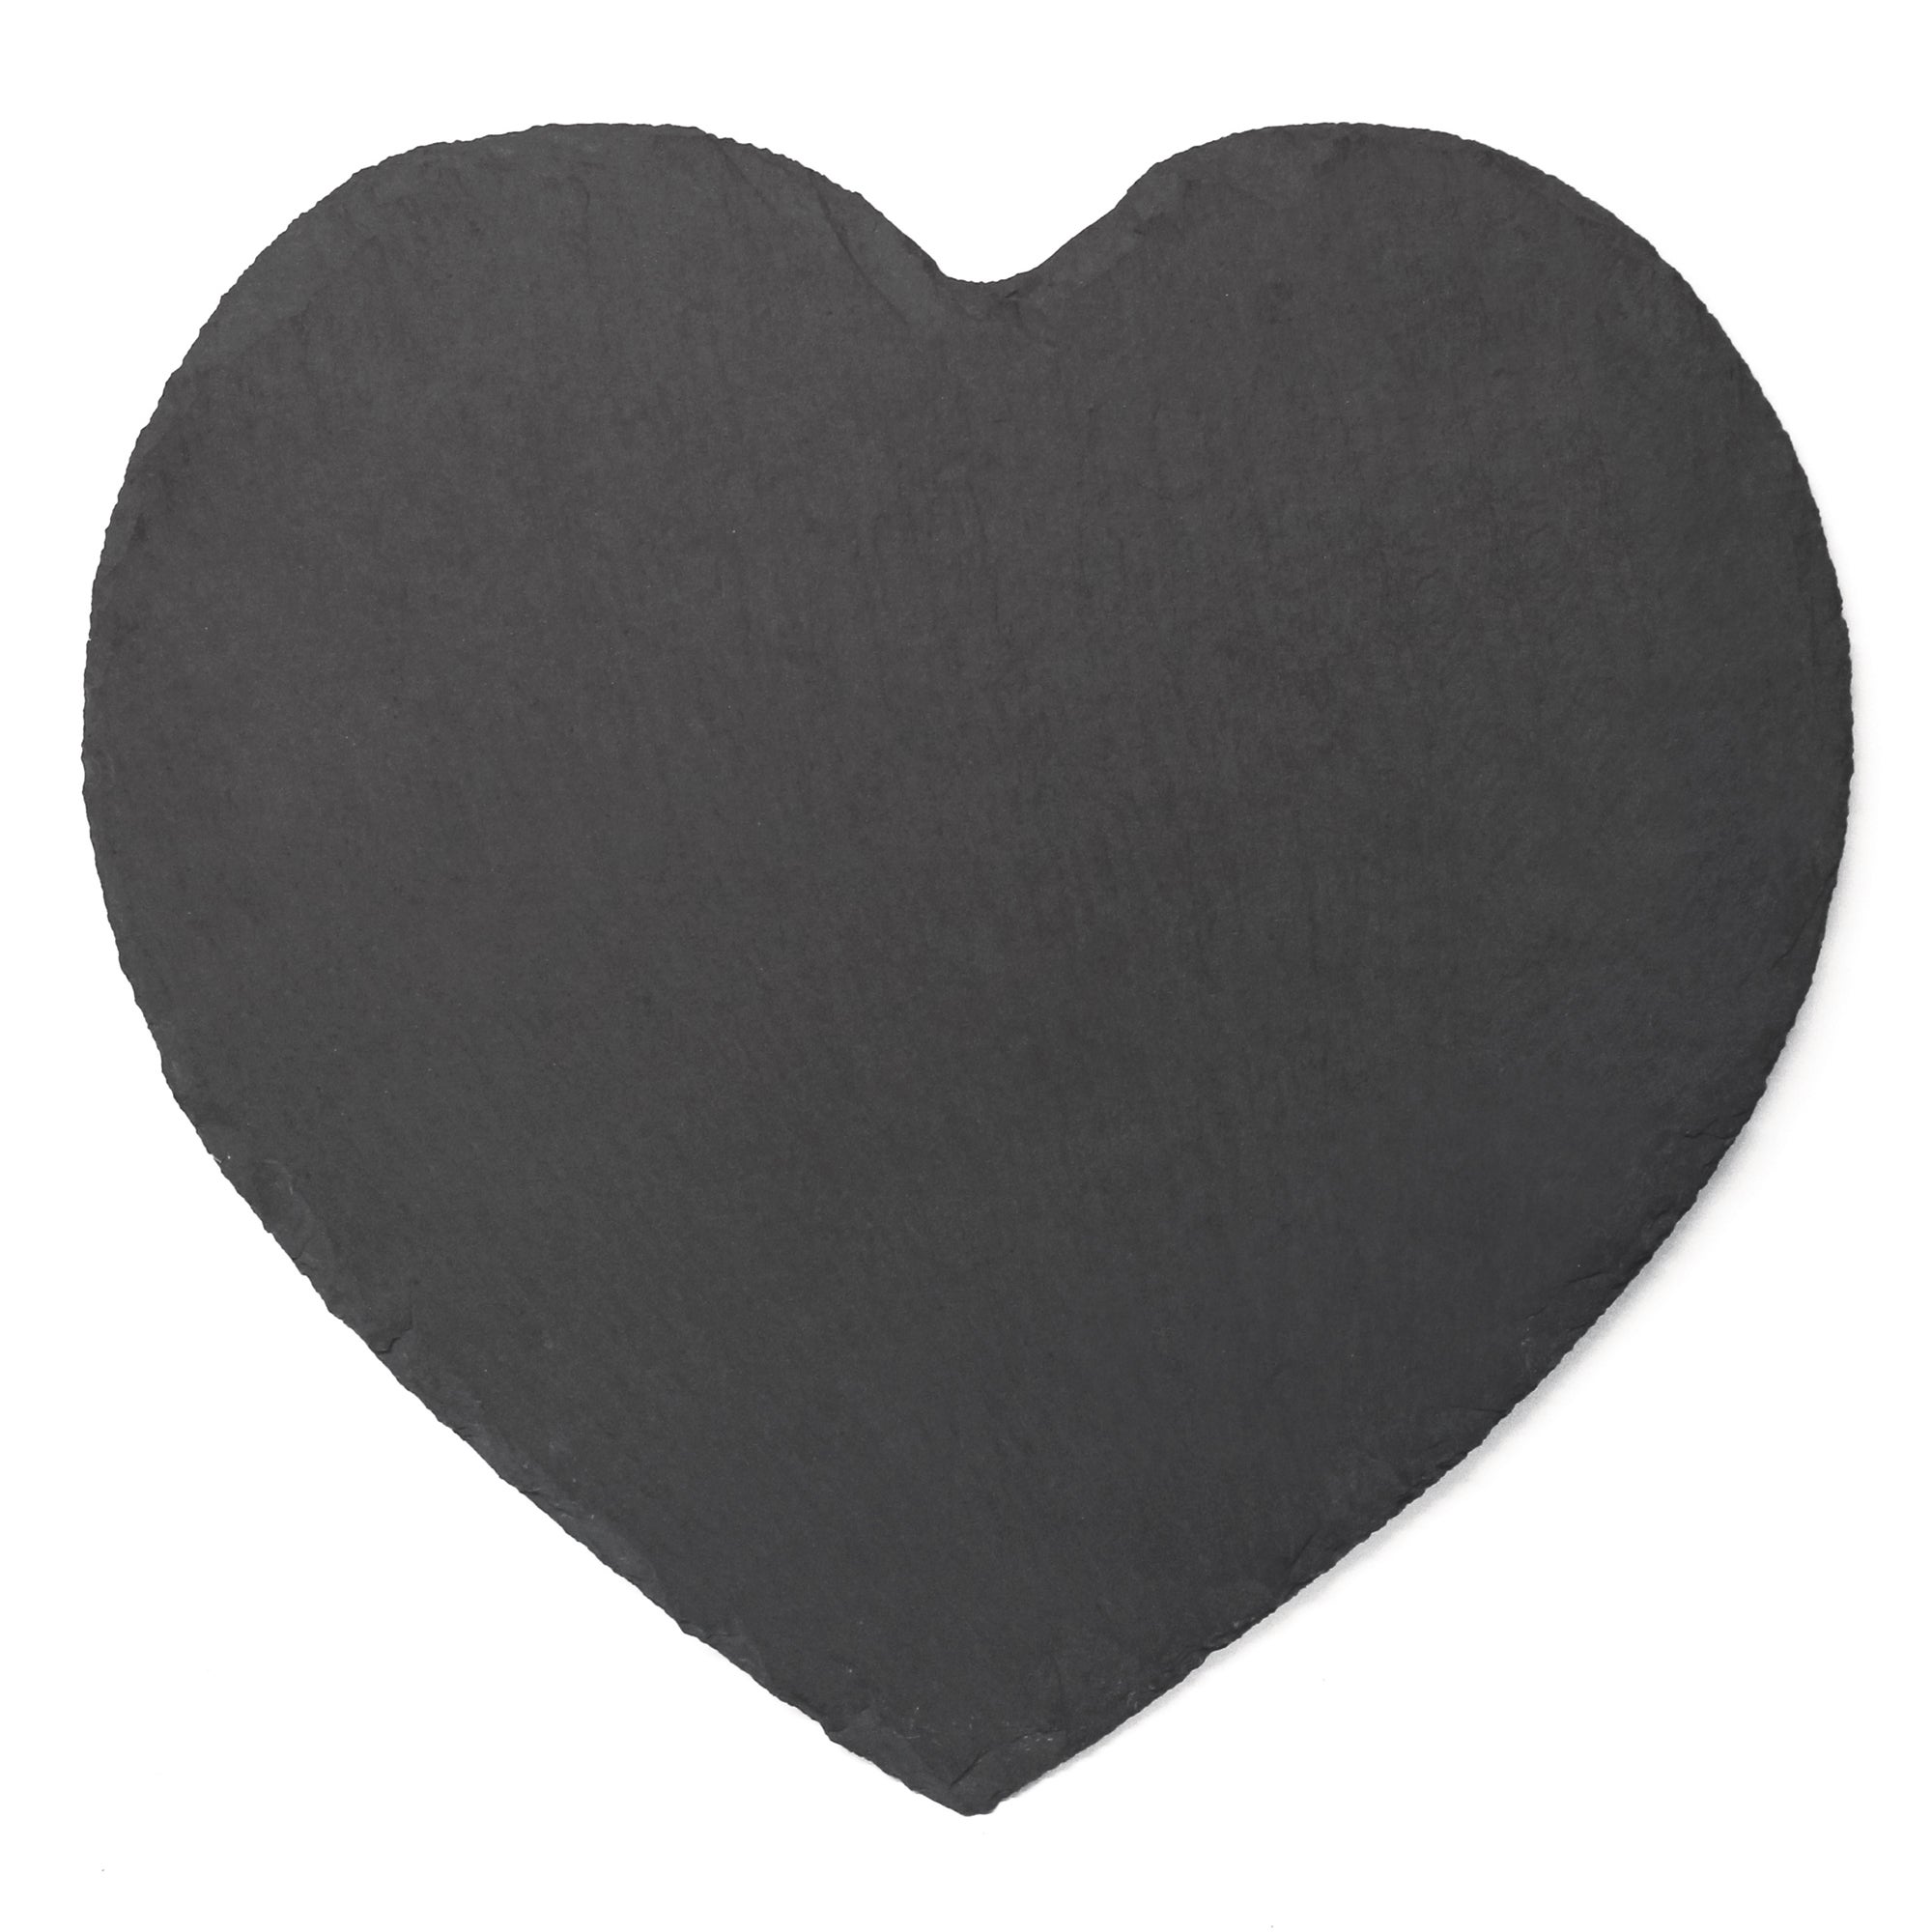 Image of Set of 2 Slate Heart Shape Placemats Grey